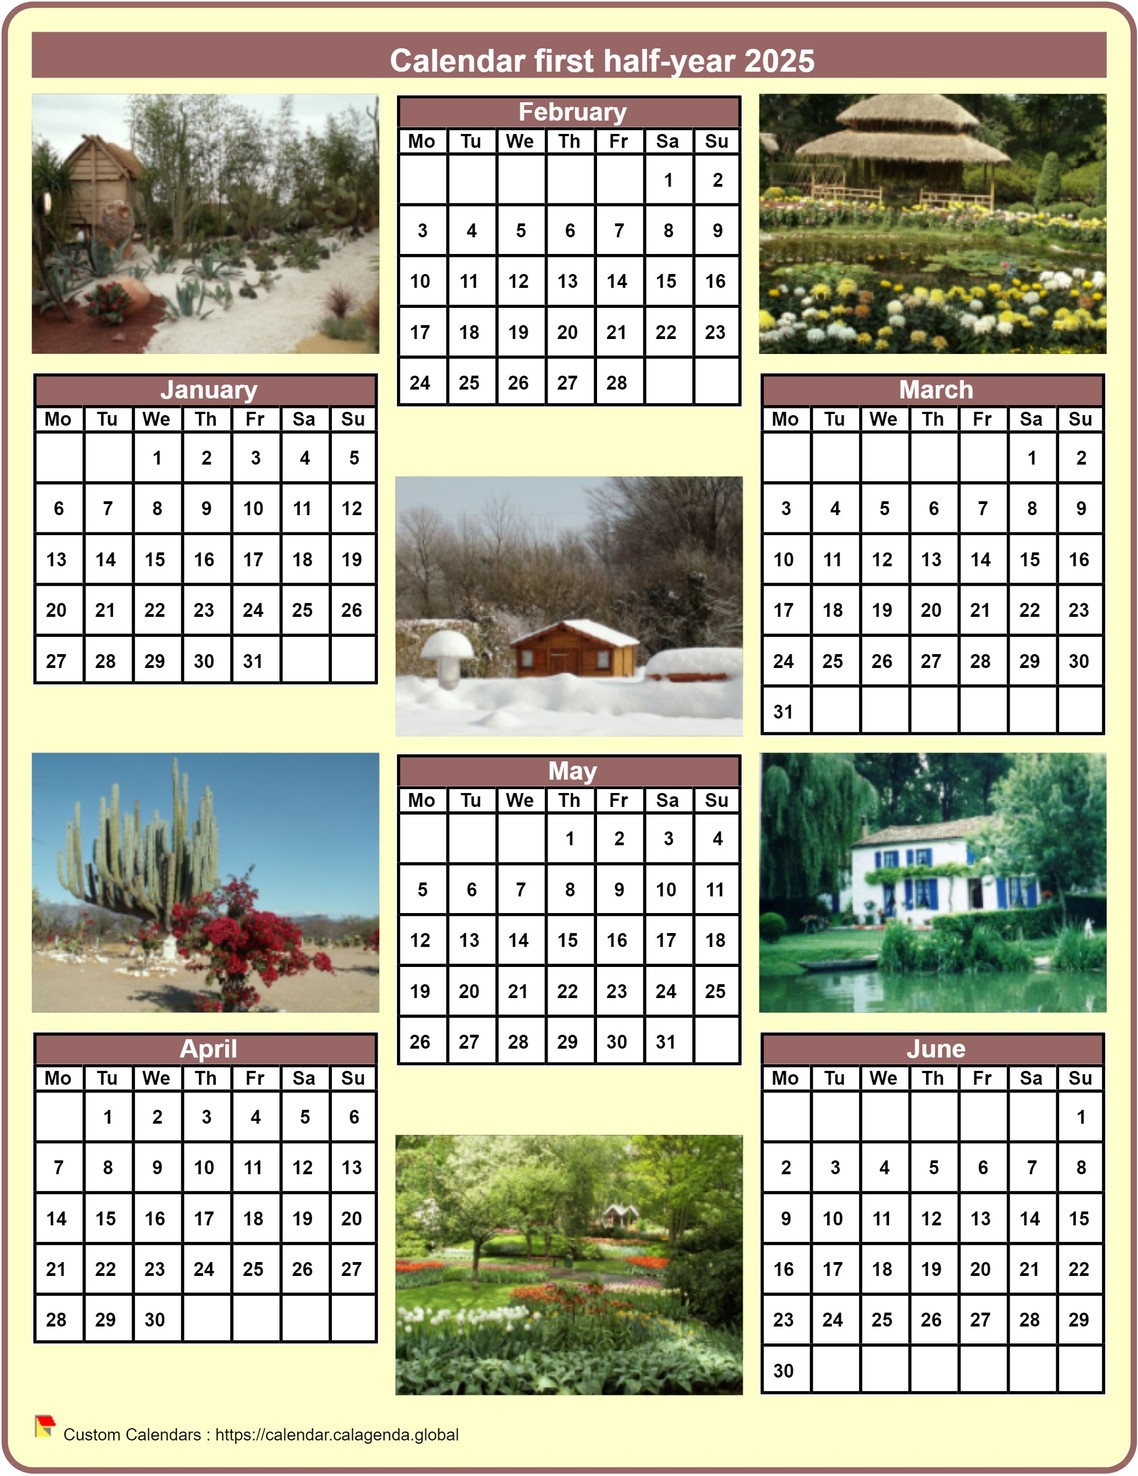 Calendar 2025 half-year with a different photo every month